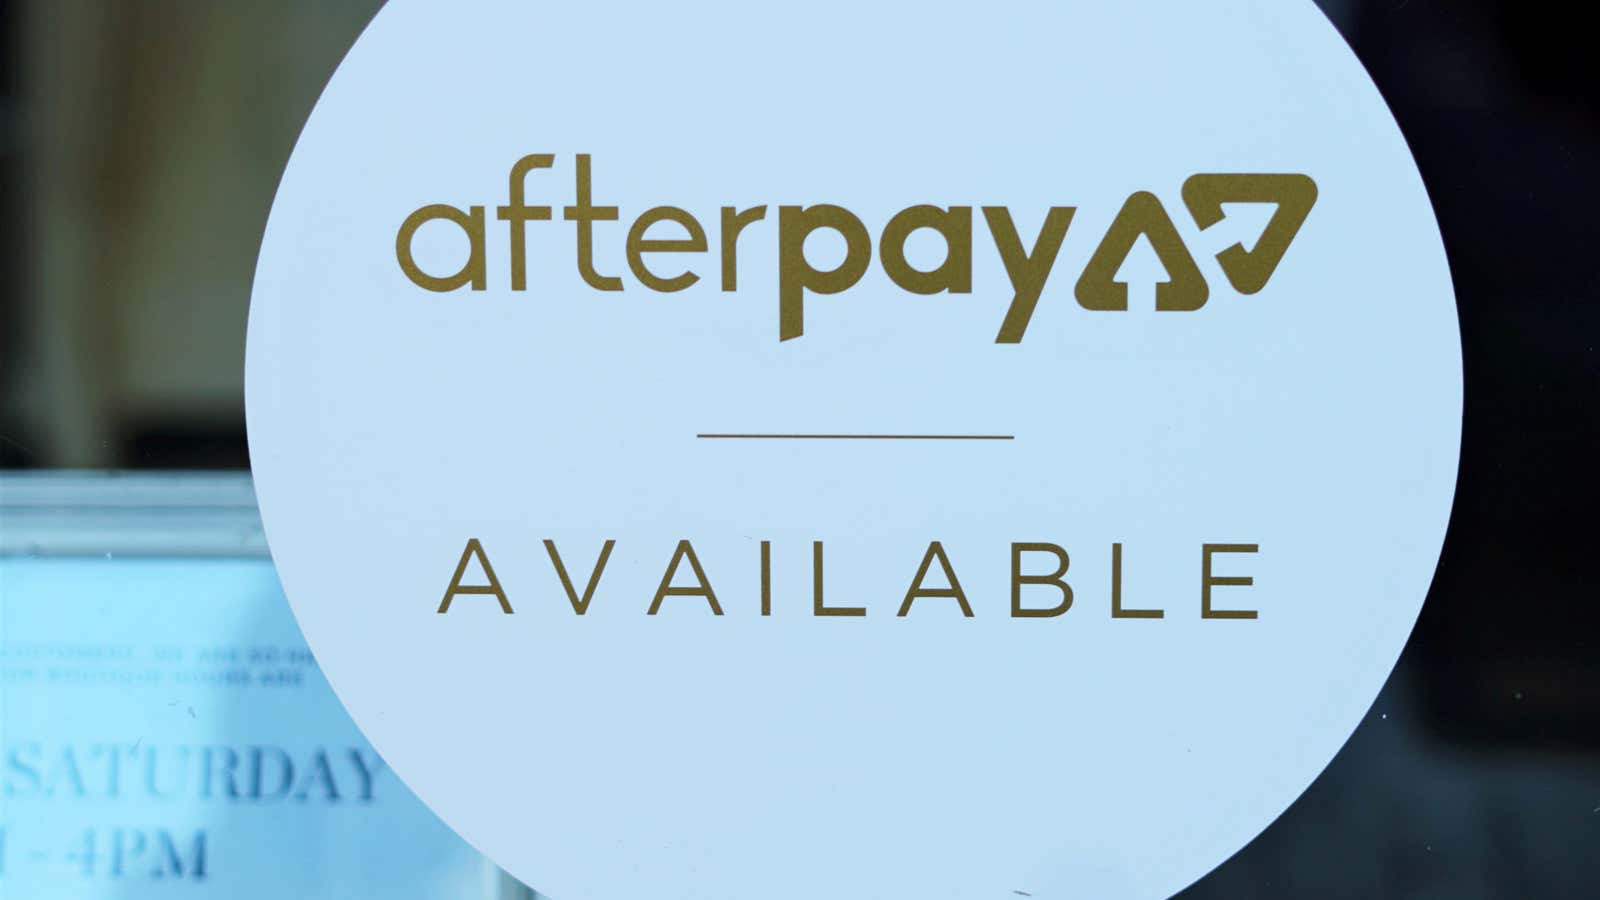 Square bought the buy-now-pay-later company Afterpay for $29 billion